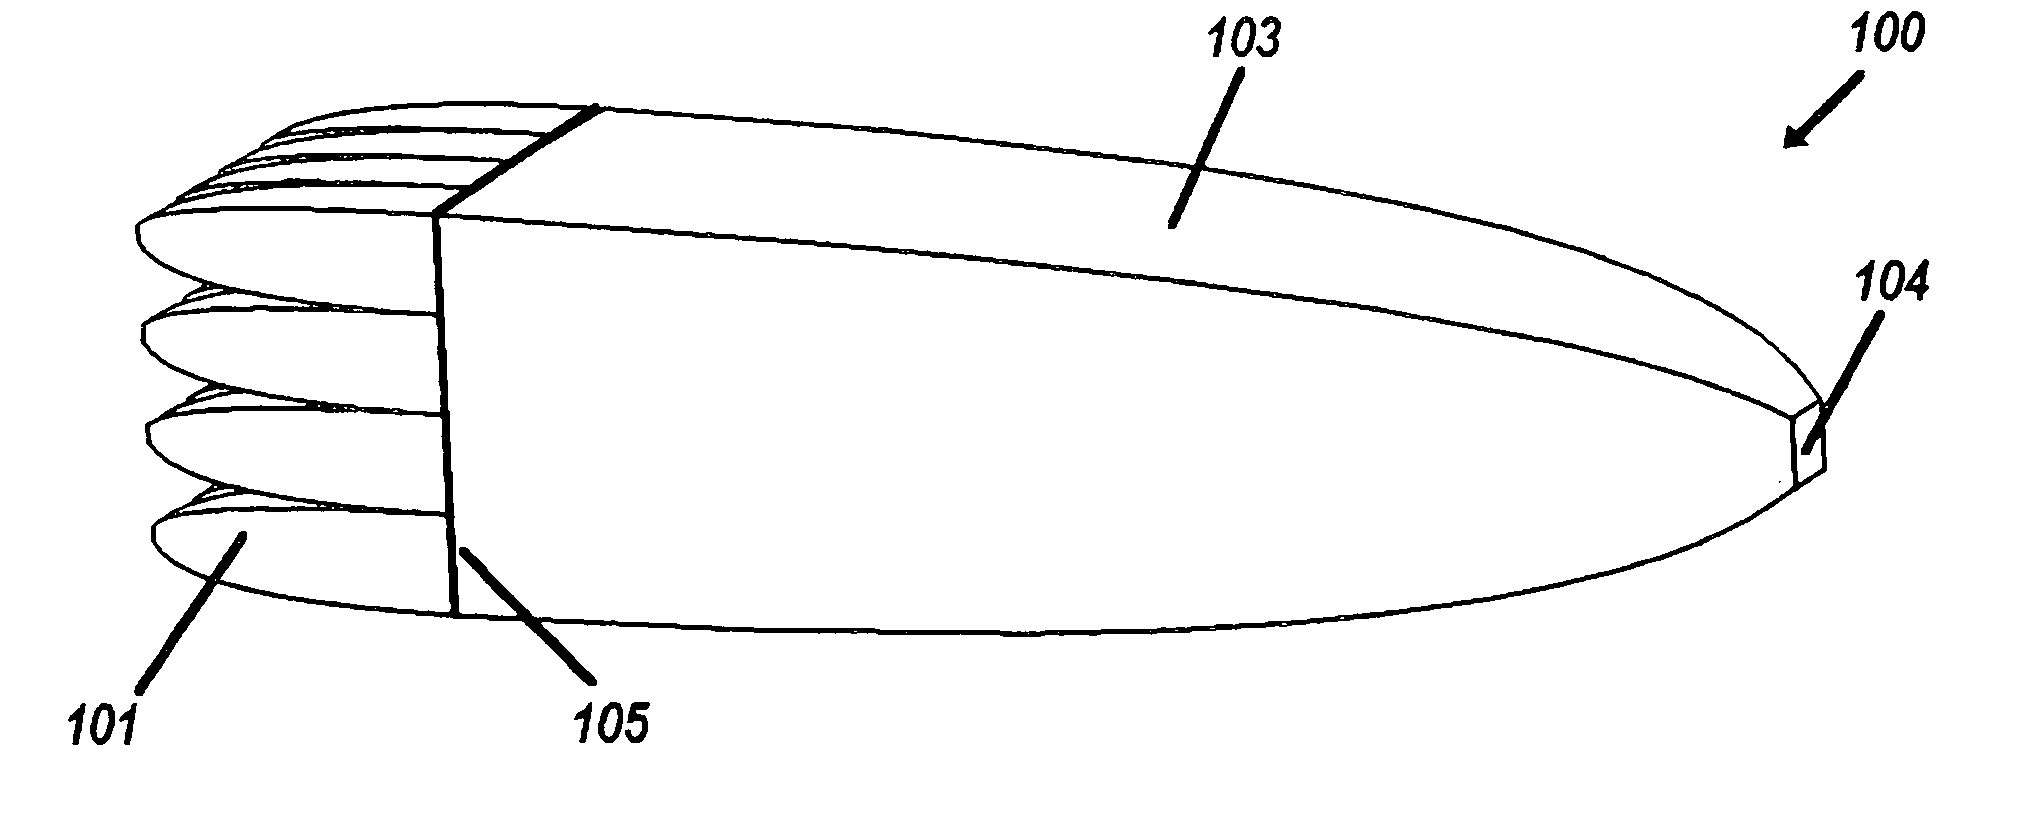 Optical manifold for light-emitting diodes